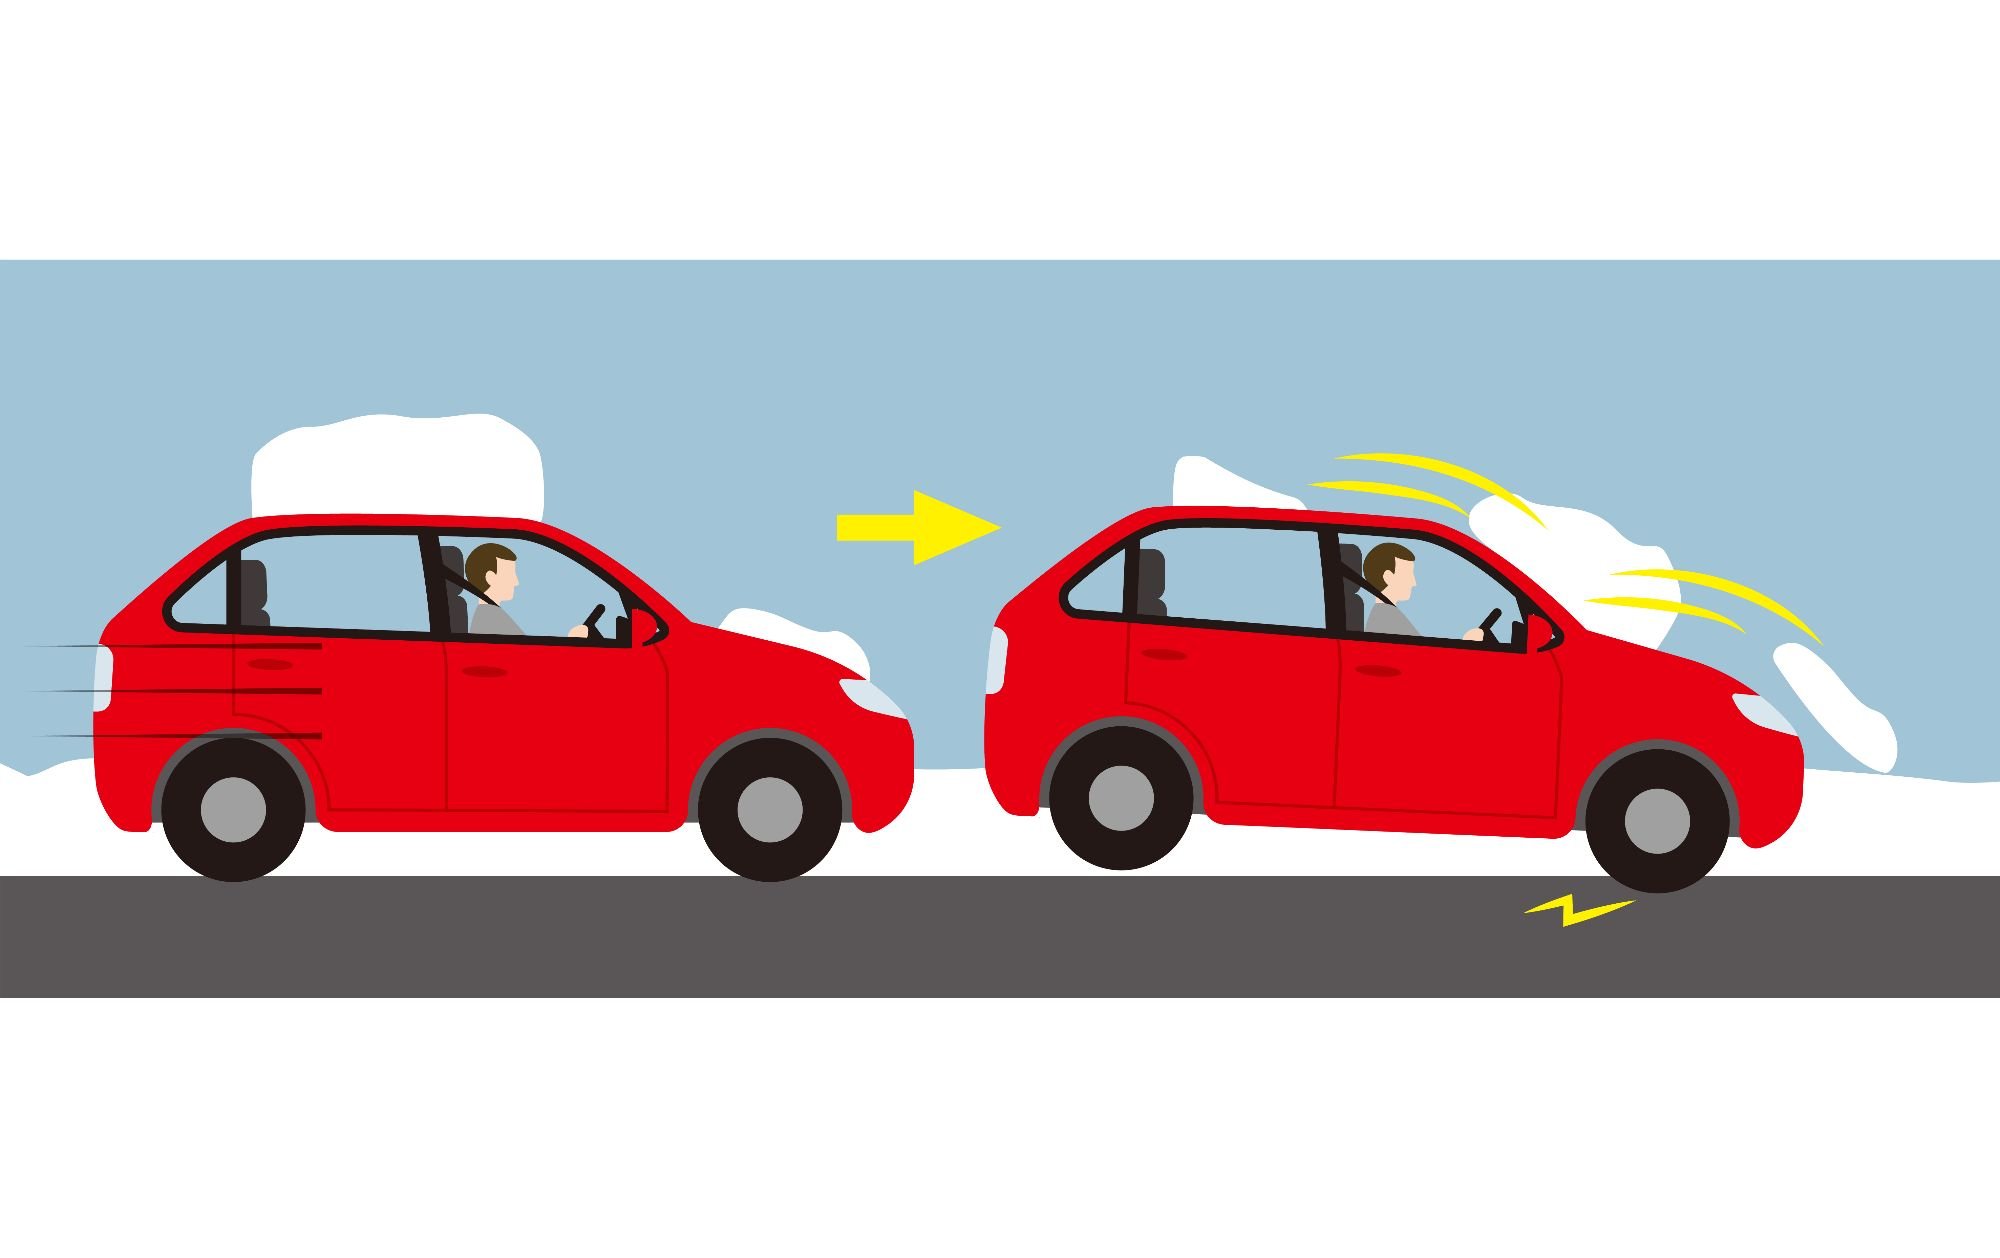 The weight of the car is thrown forward in an emergency stop.  This means the back of the car becomes very light  If the rear brakes are not adjusted properly  it may result in a rear wheel skid